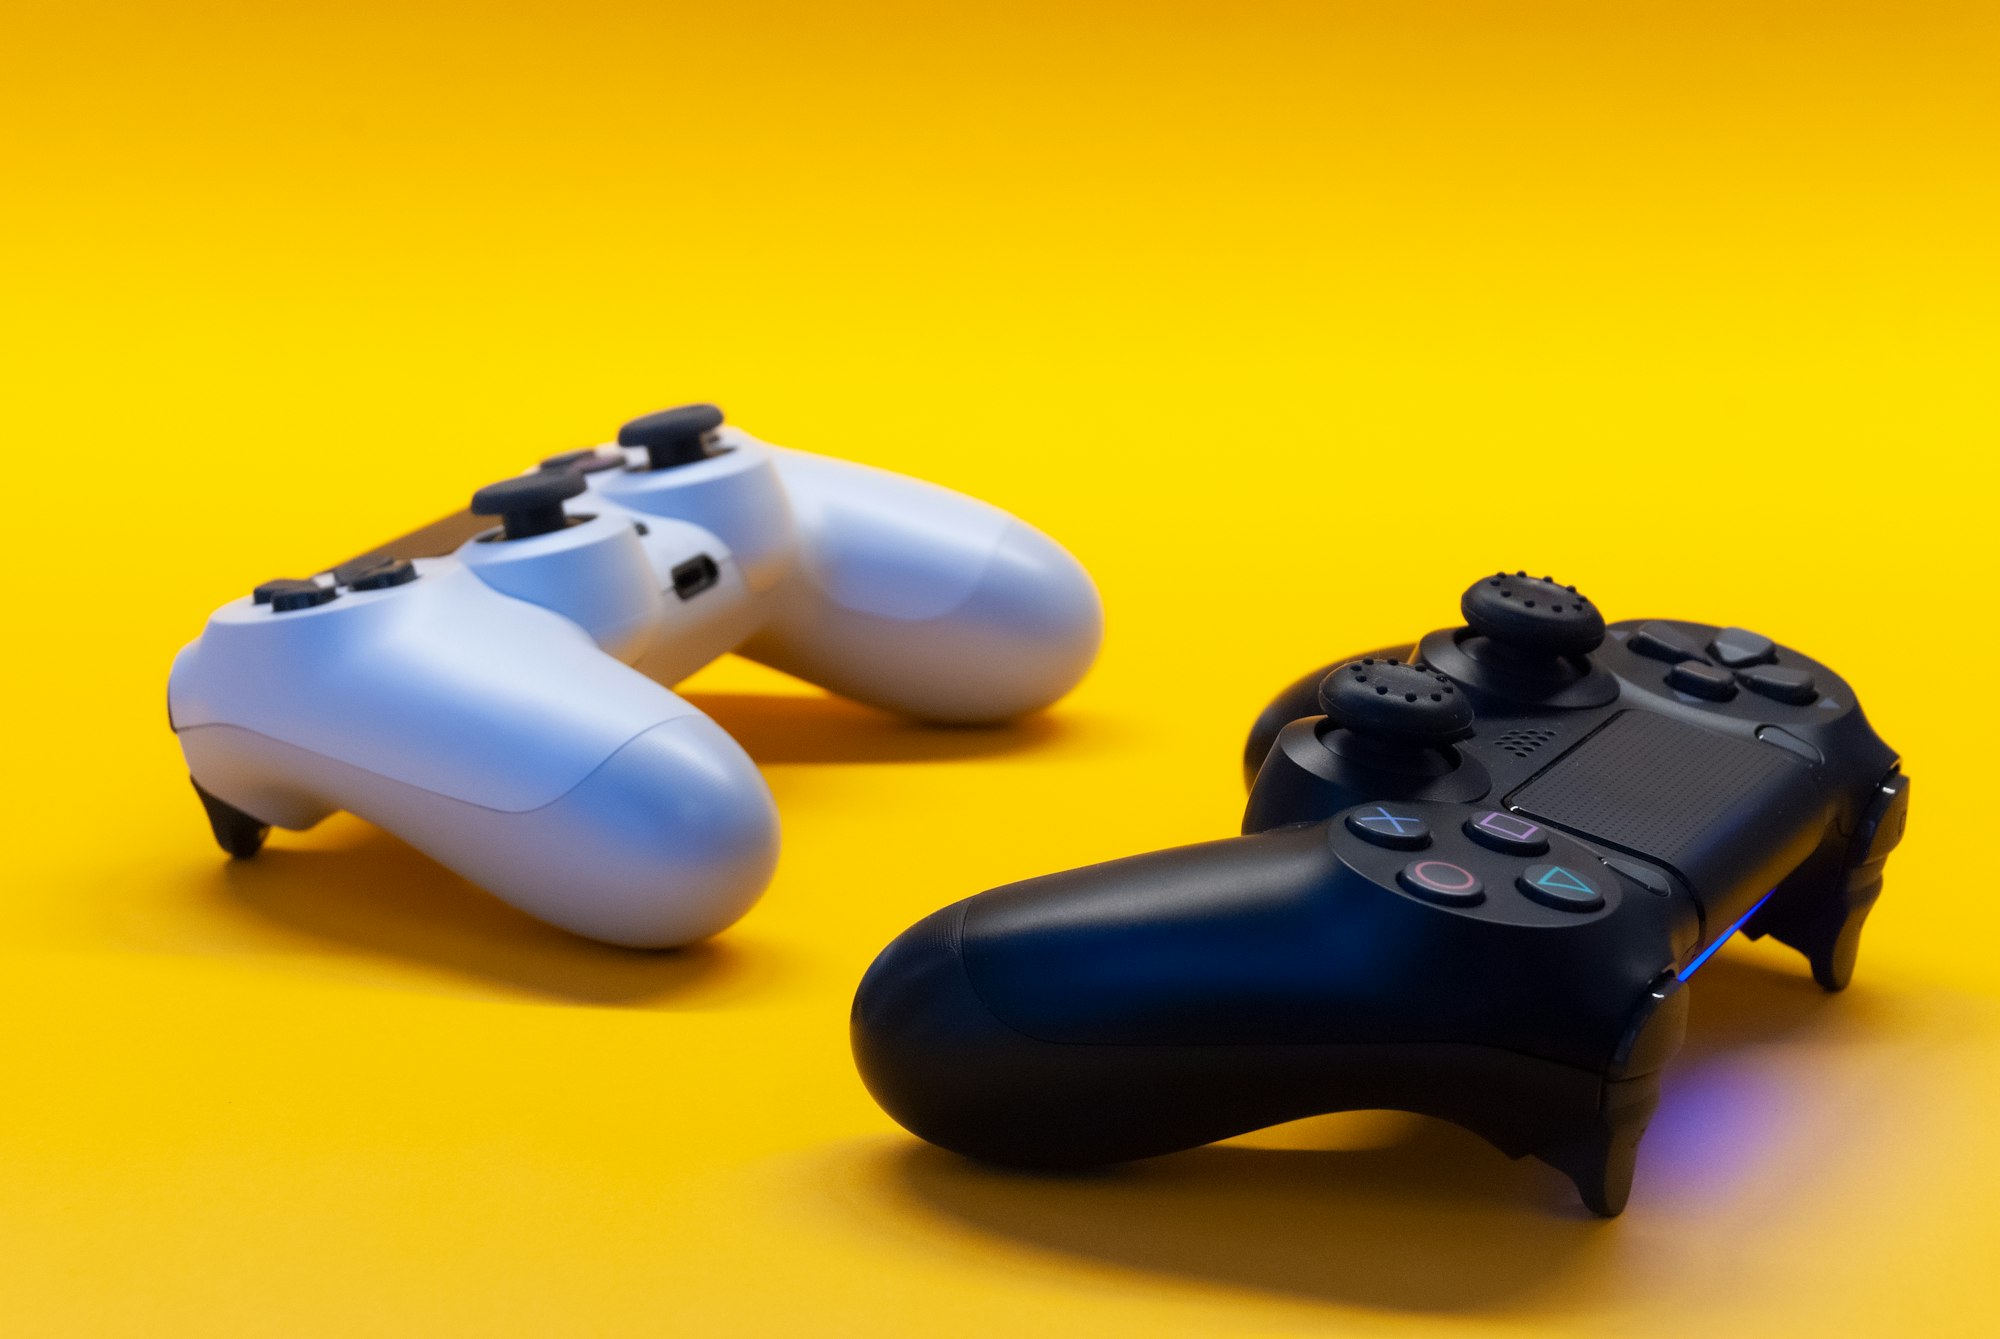 Black and white controllers on a  yellow background
